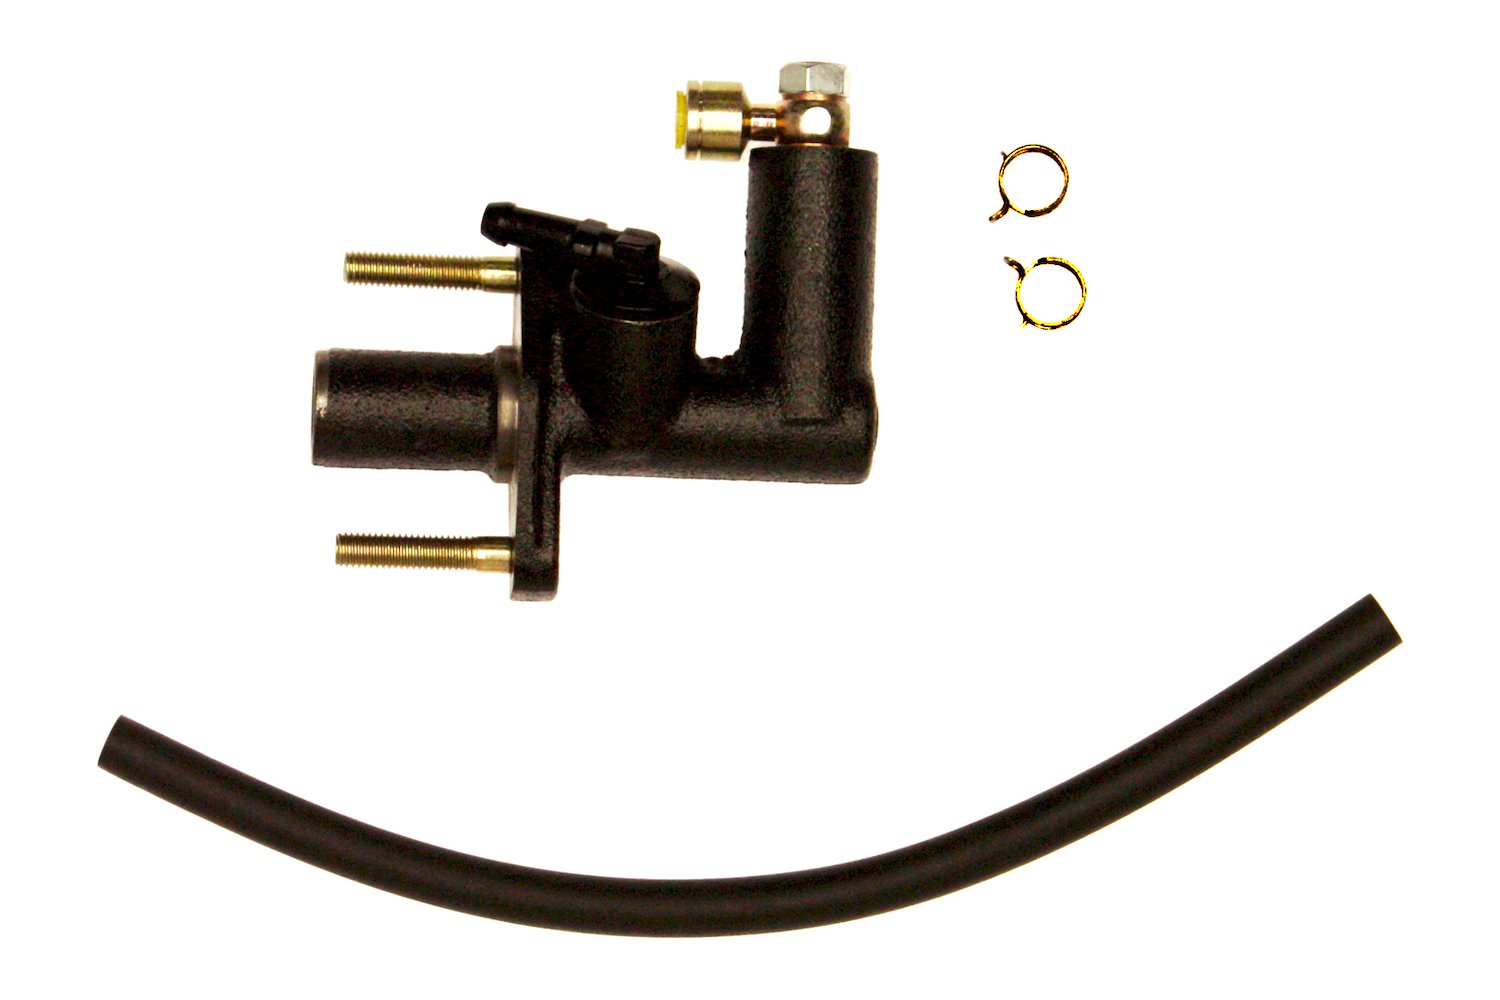 MC487 OEM Replacement Clutch Master Cylinder, 2004-2005 Mazda